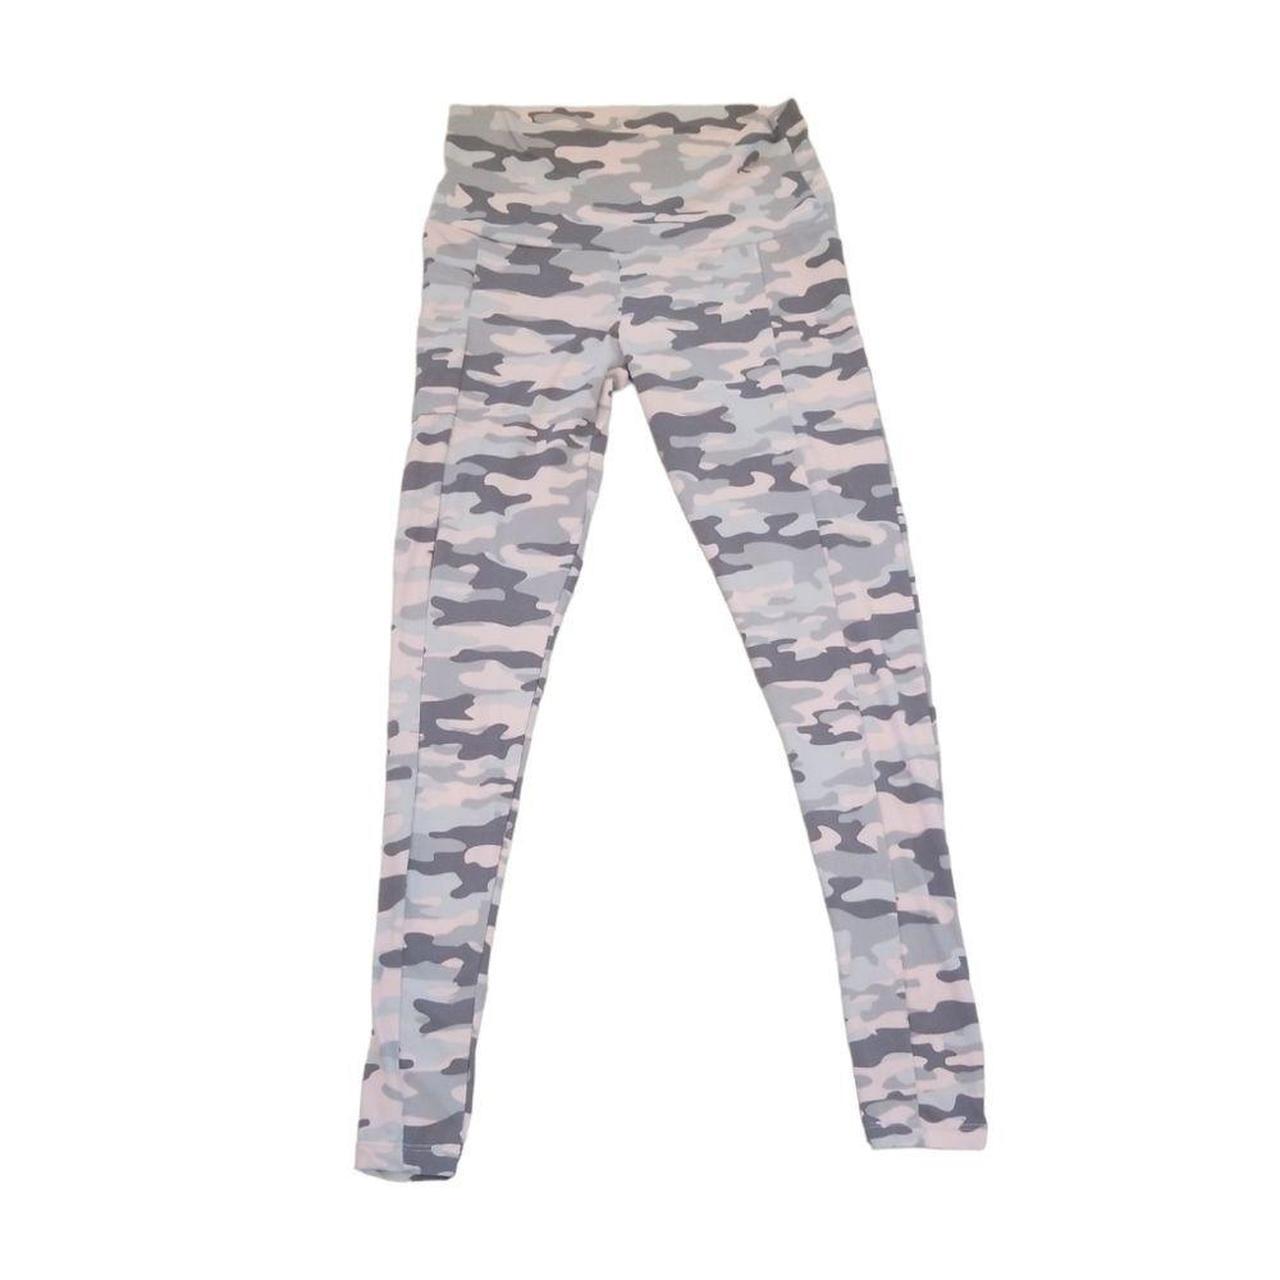 Pink camo leggings. Womens size small. So cute and - Depop